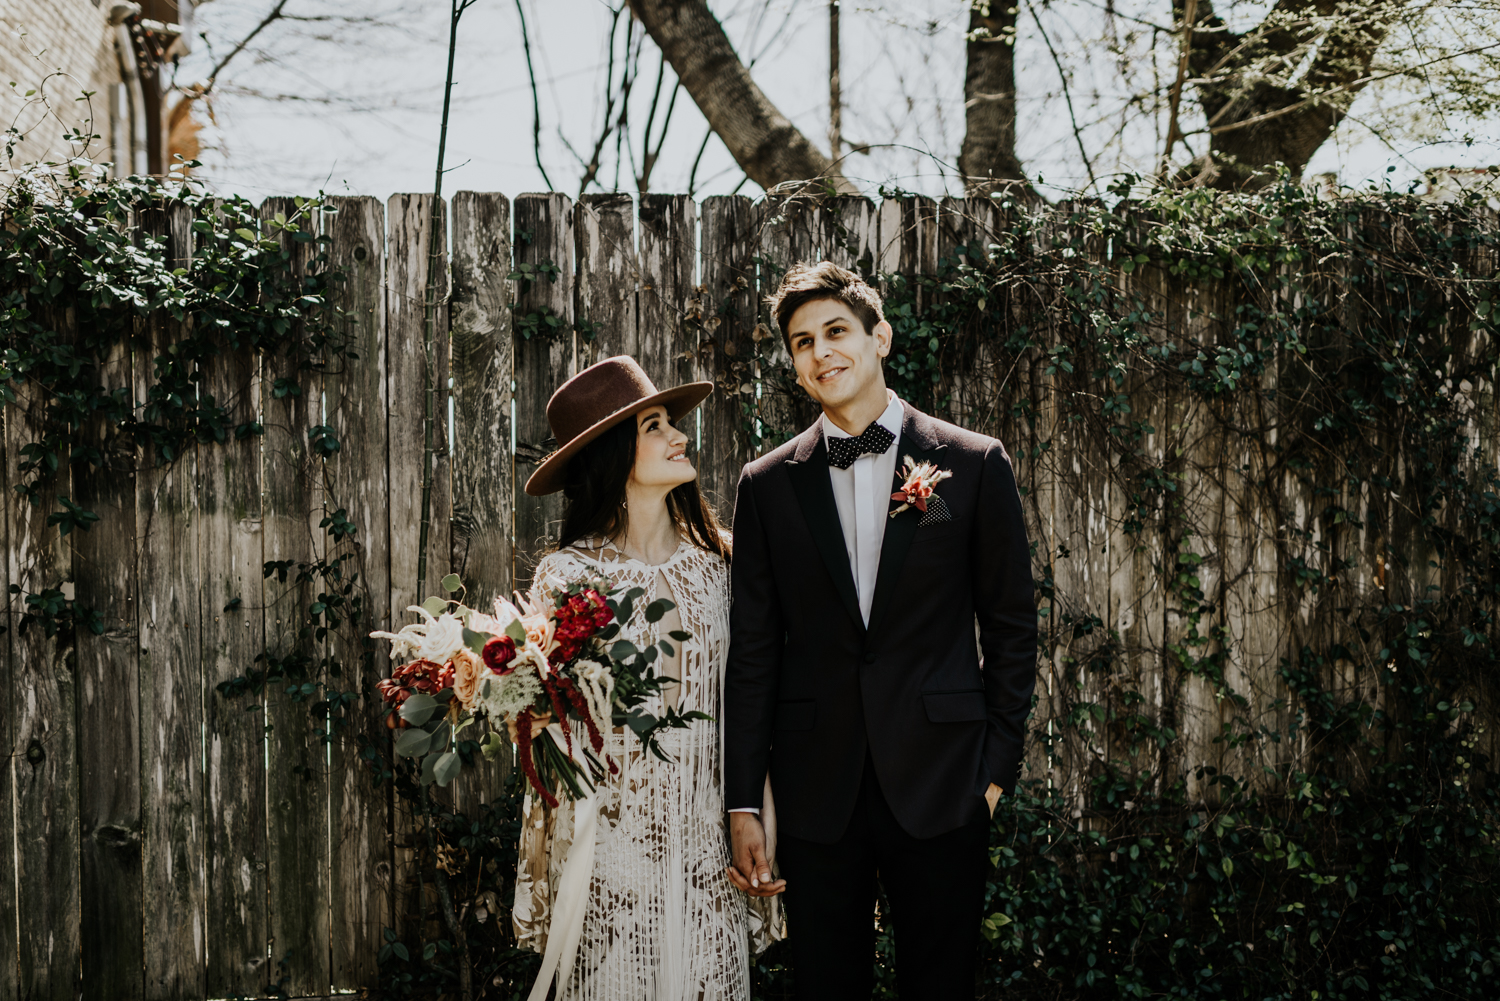 Intimate Bohemian Wedding at One Eleven East in Hutto, Texas